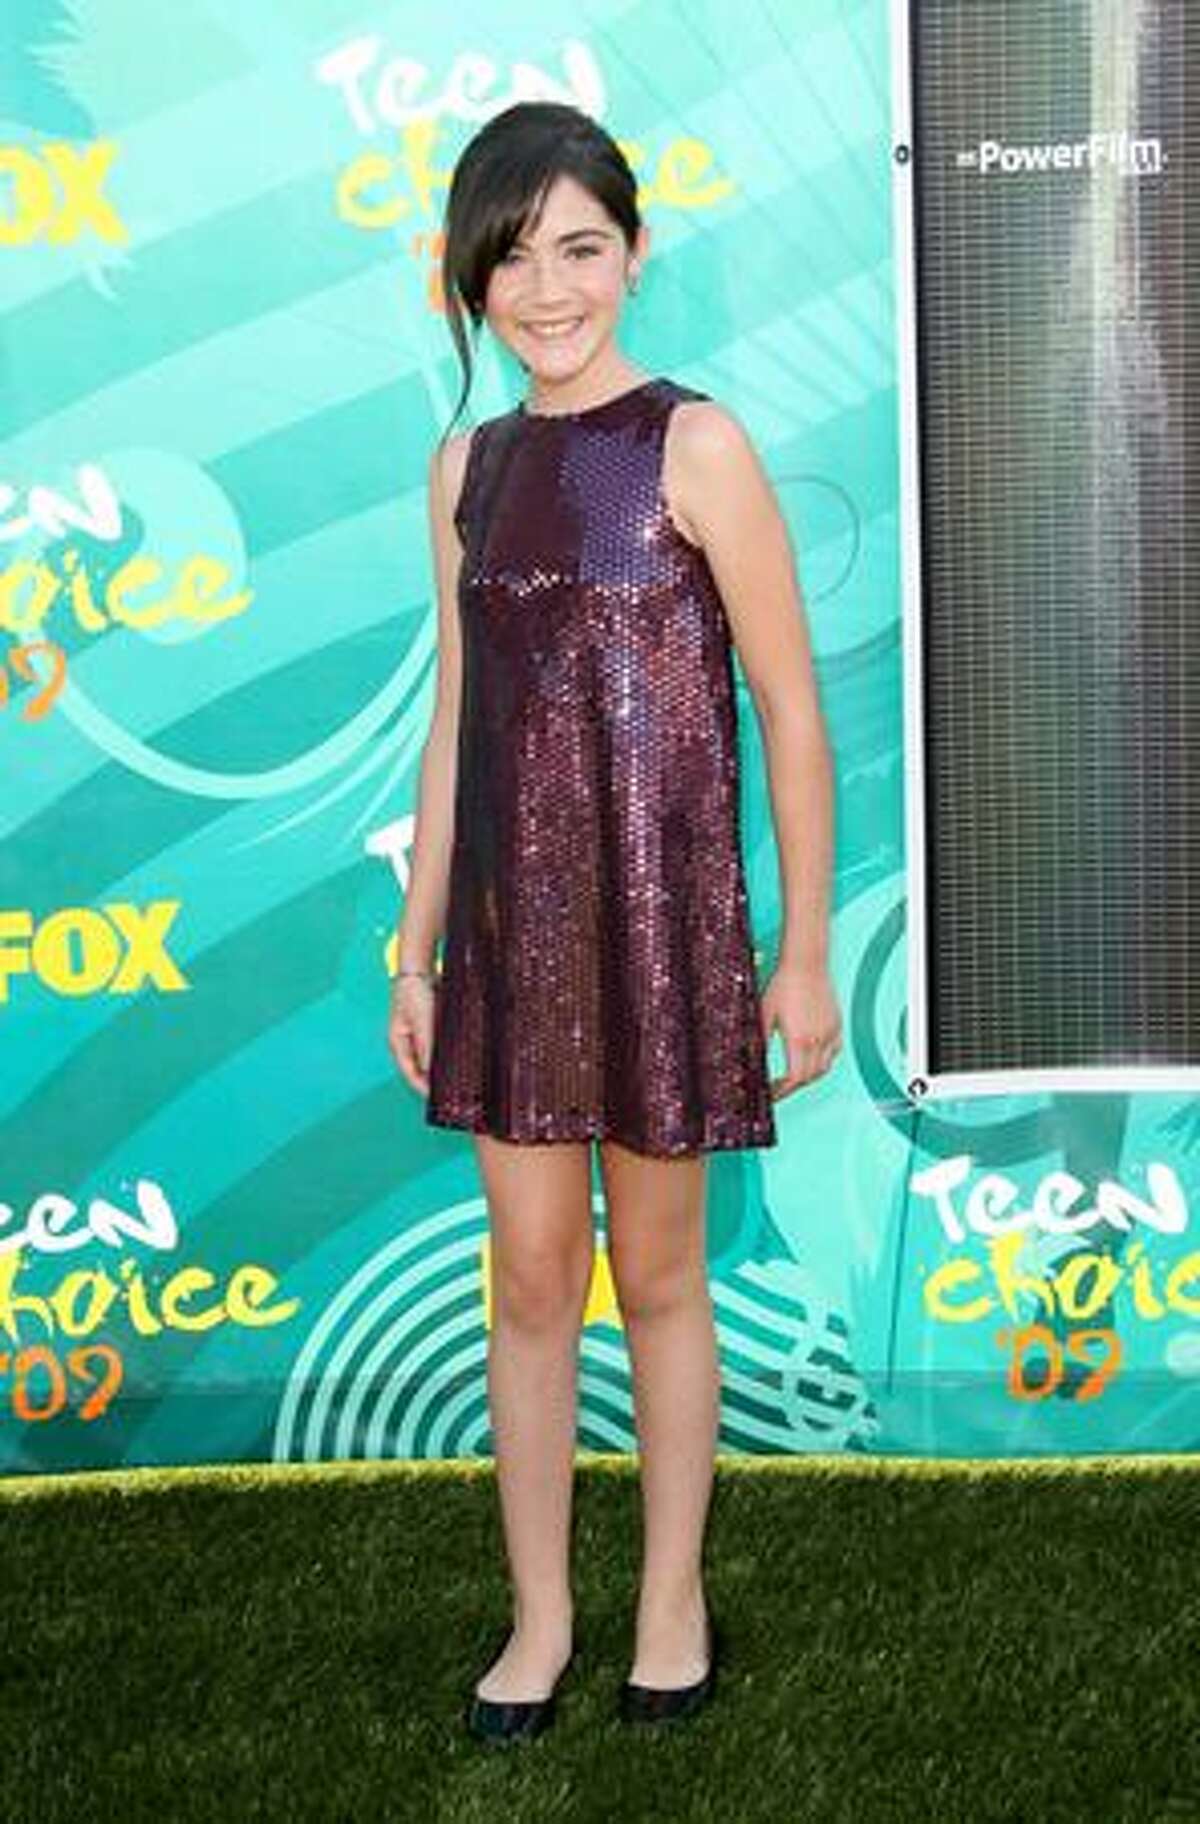 Actress Isabelle Fuhrman arrives at the 2009 Teen Choice Awards held at Gibson Amphitheatre on Sunday in Universal City, California.